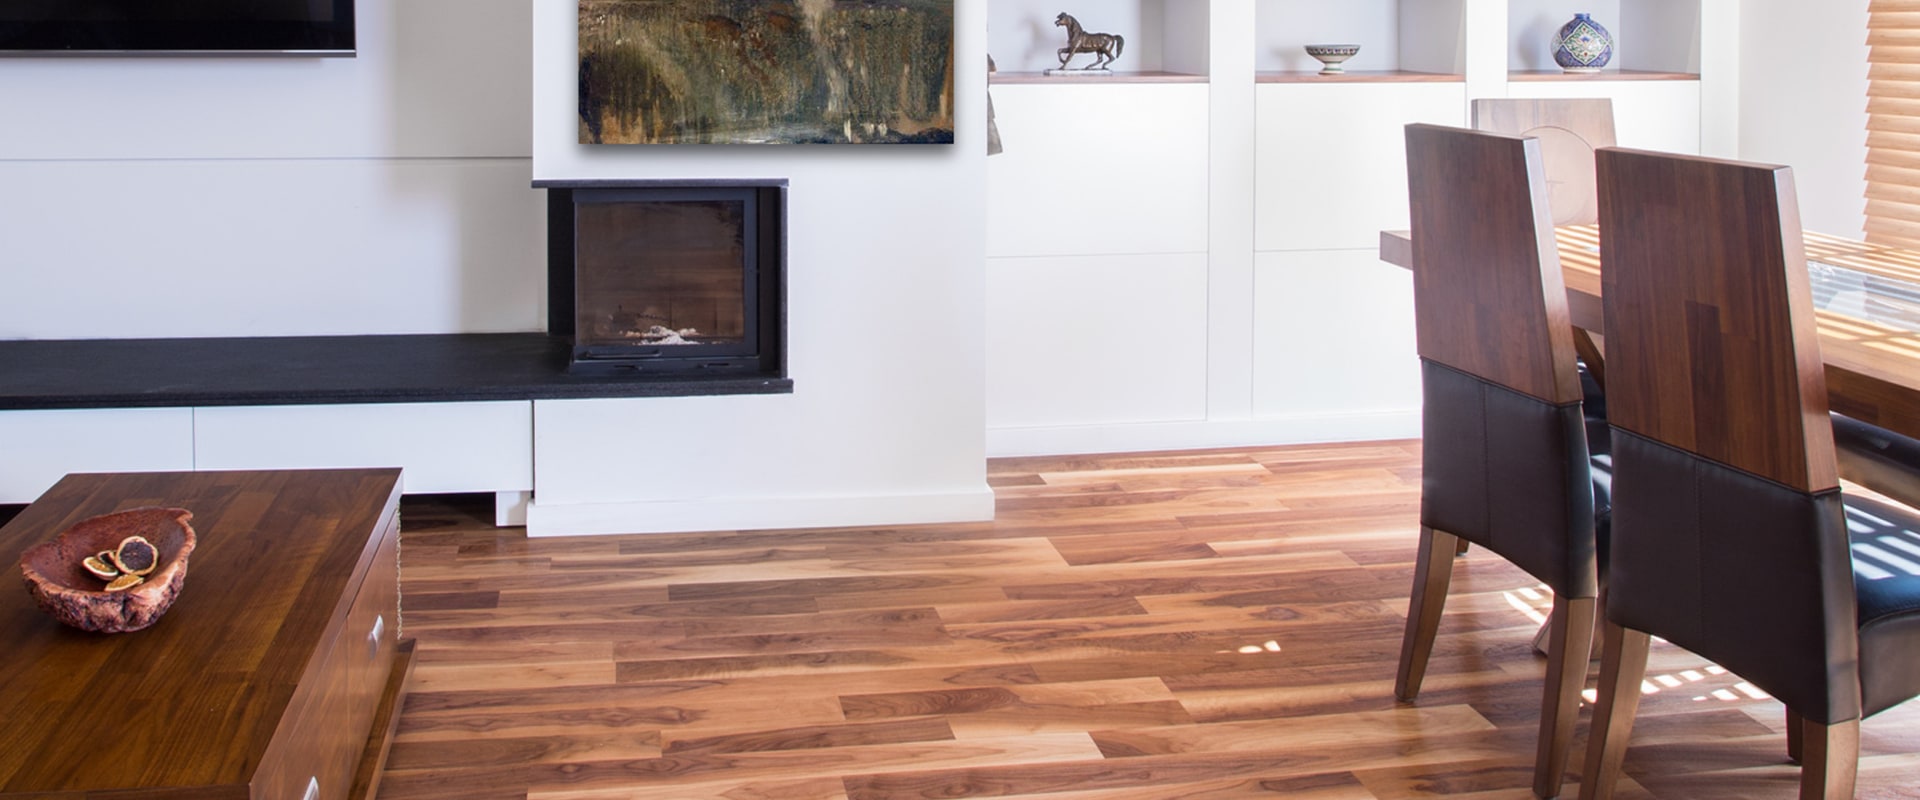 Why timber flooring?